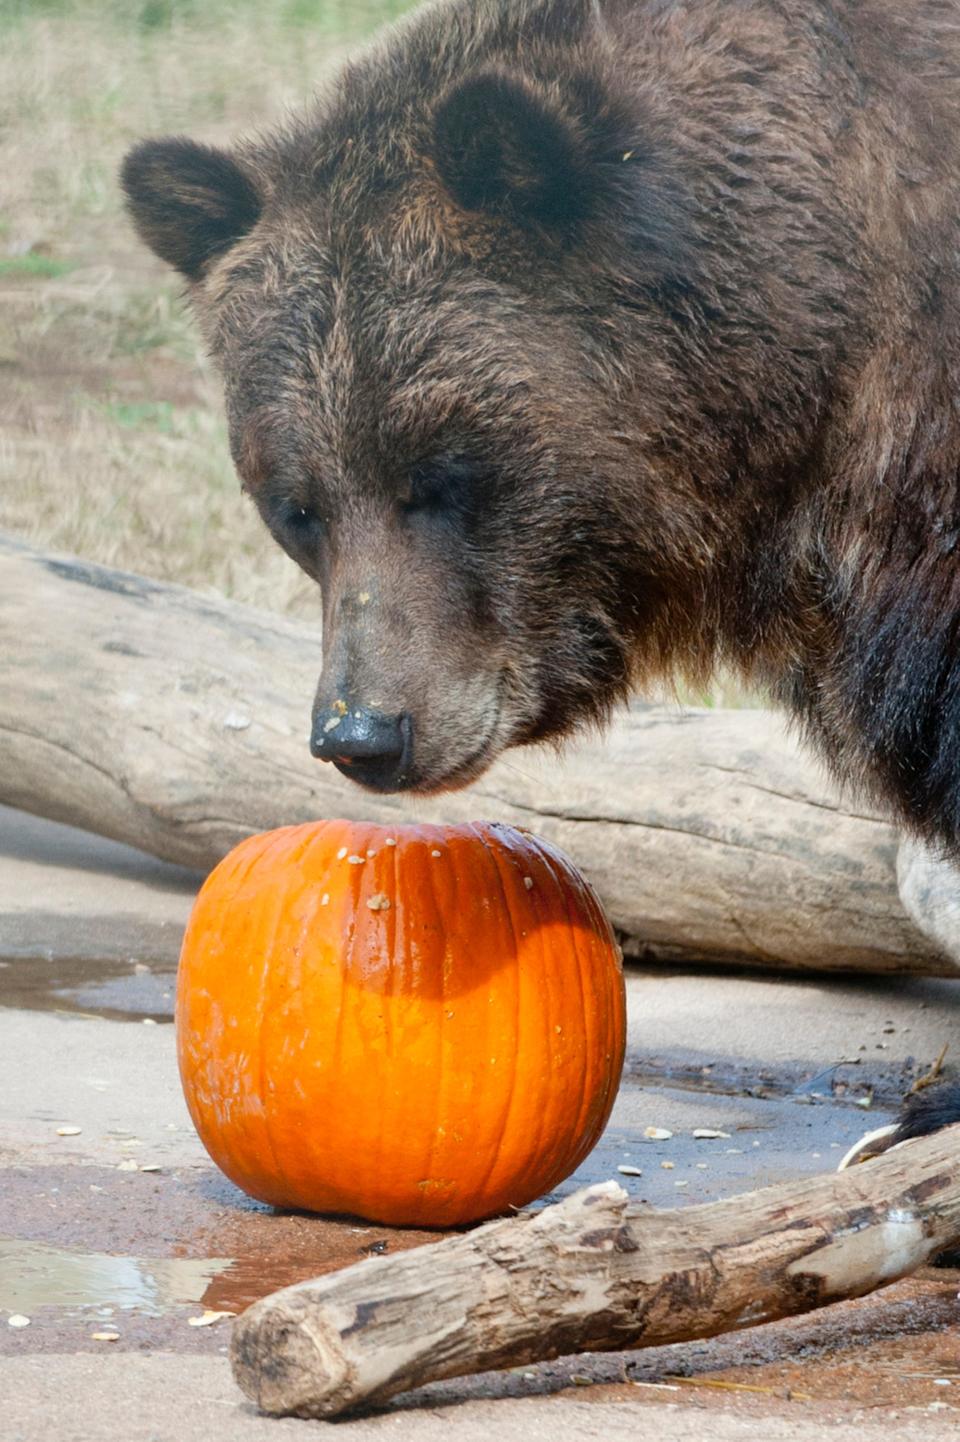 Inga, a 13-yr-old grizzly bear checks out a meat and fish-filled pumpkin at the Louisville Zoo's annual pumpkin smash. The pumpkins being fed to the animals are from the zoo's Halloween event.
November 04, 2018